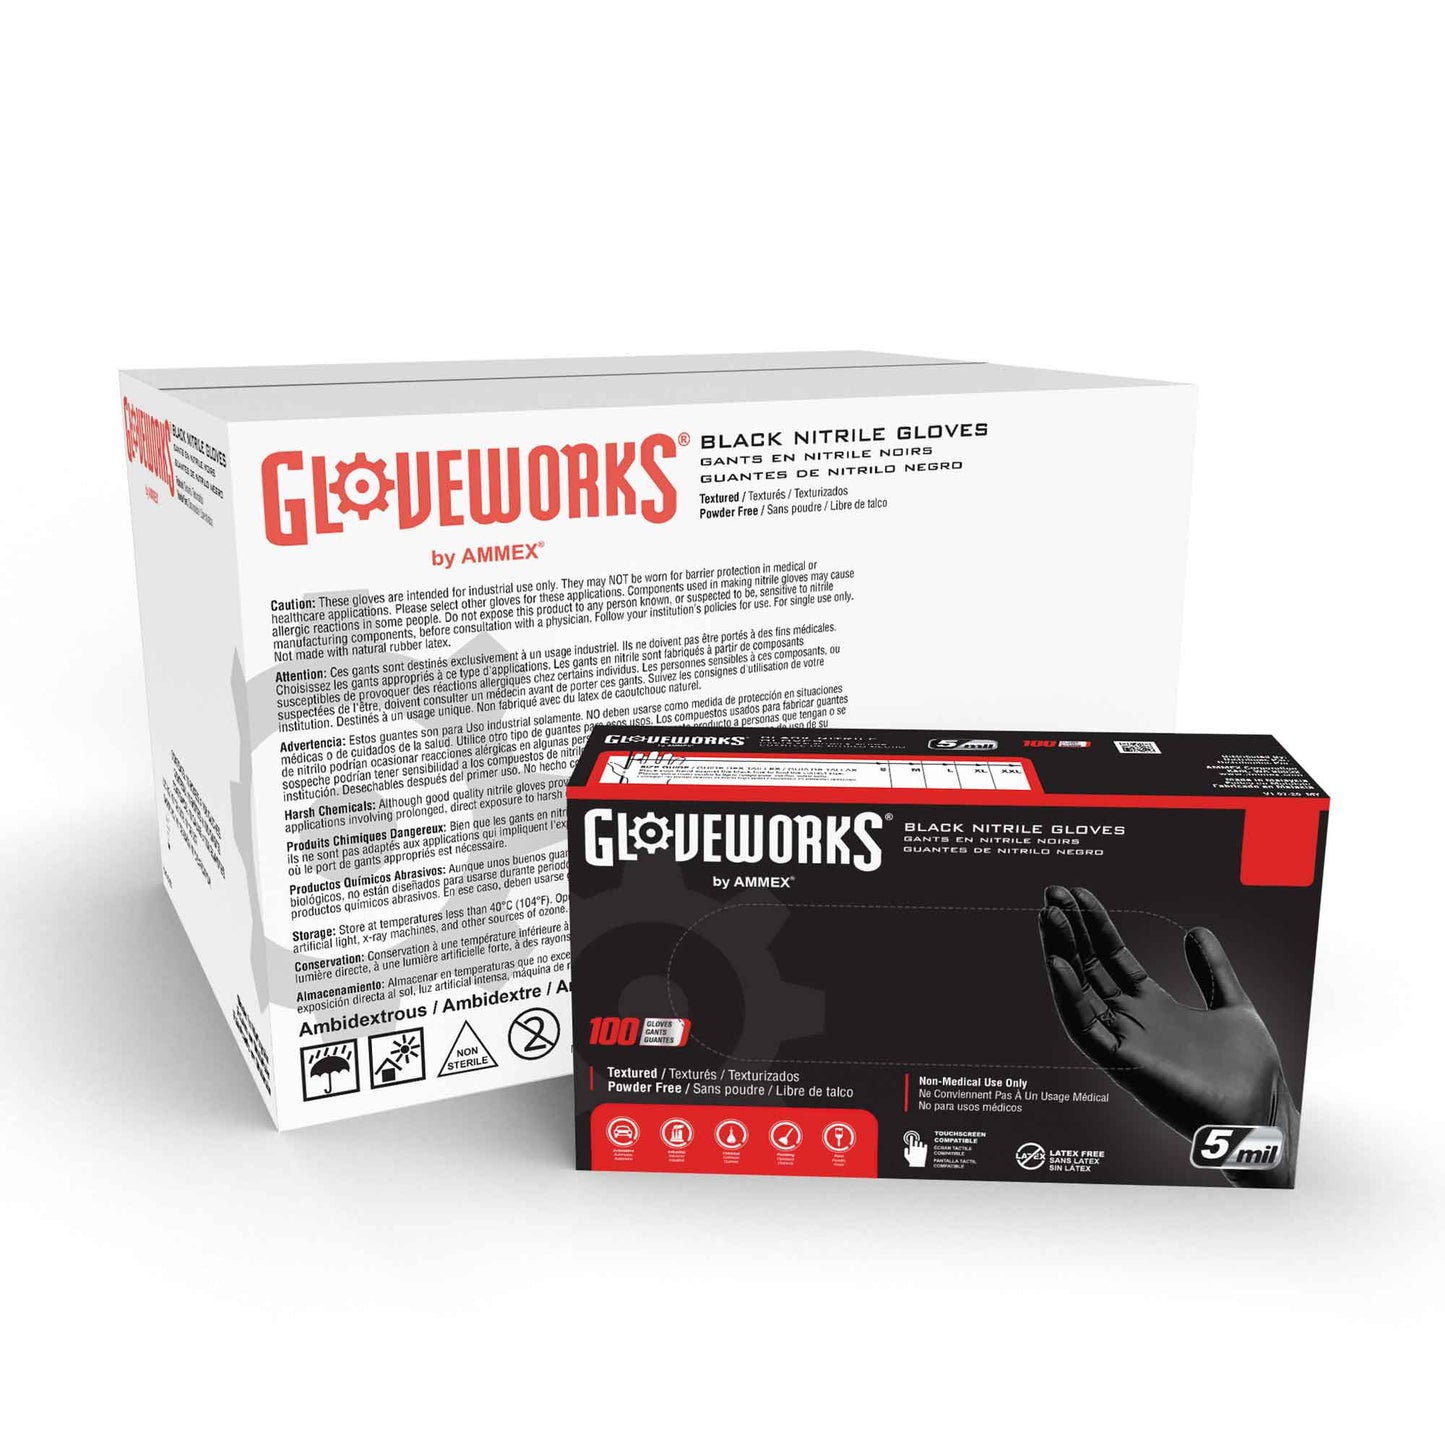 GloveWorks® GPNB Black Nitrile Gloves, Fully Textured, Extra Thick by Ammex, 5-6 Mil, Powder Free, Sold By the Case. Free Shipping!